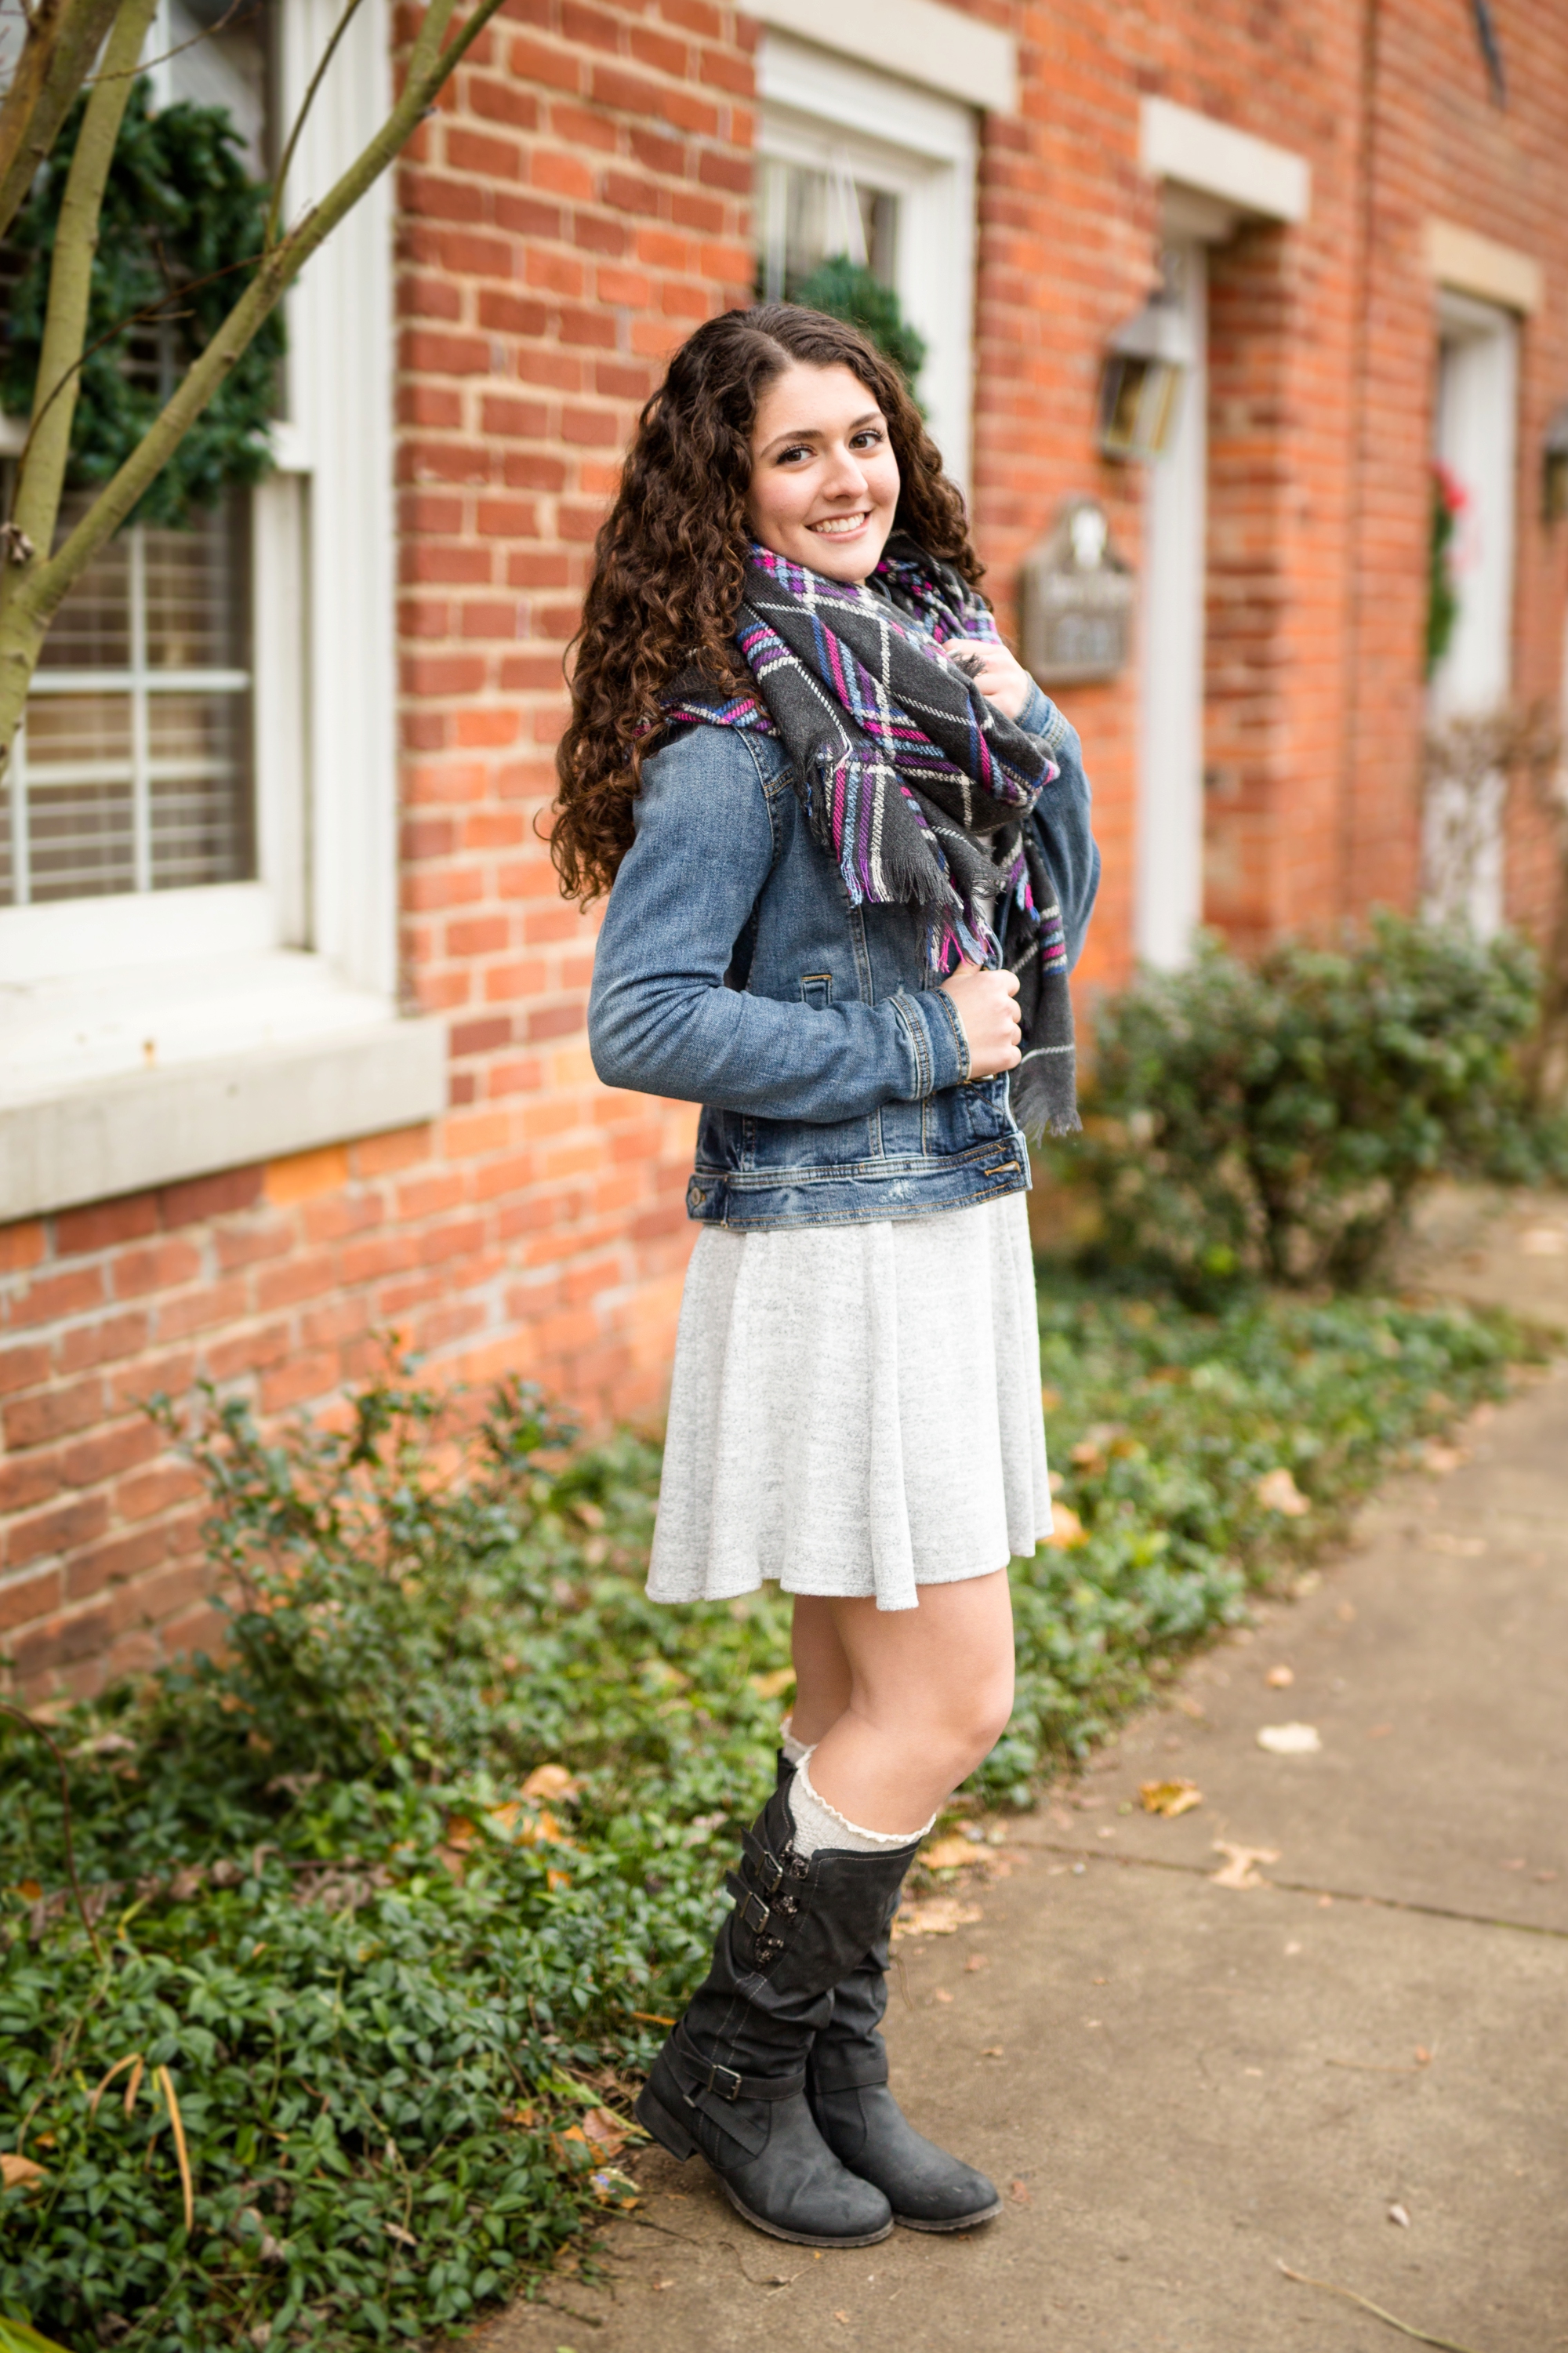  A blanket scarf and a jacket not only look adorable, but have you ever worn a blanket scarf?! They are SO WARM! 